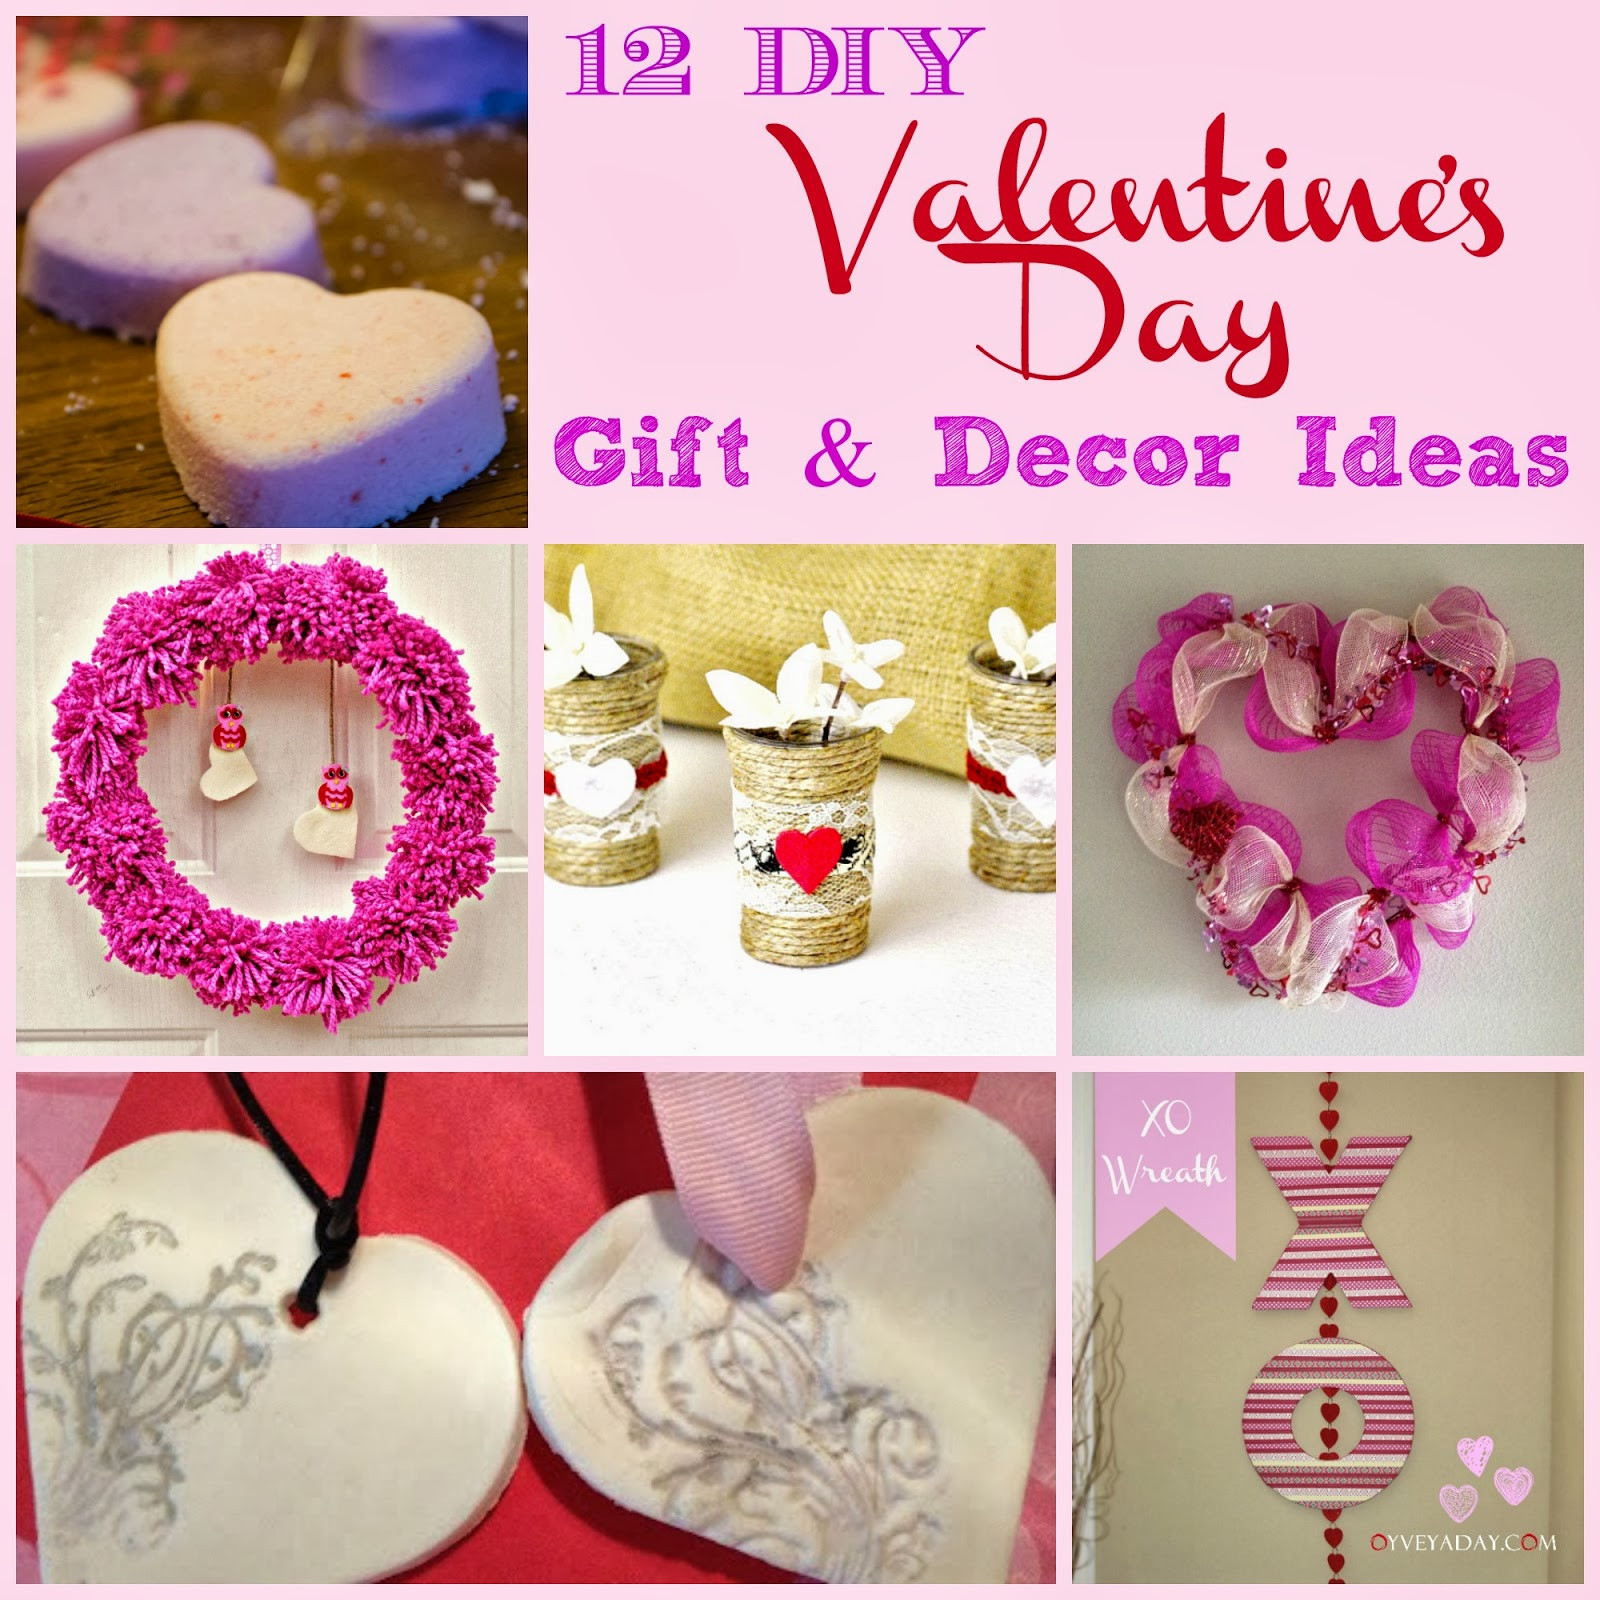 Valentines Homemade Gift Ideas
 12 DIY Valentine s Day Gift & Decor Ideas Outnumbered 3 to 1